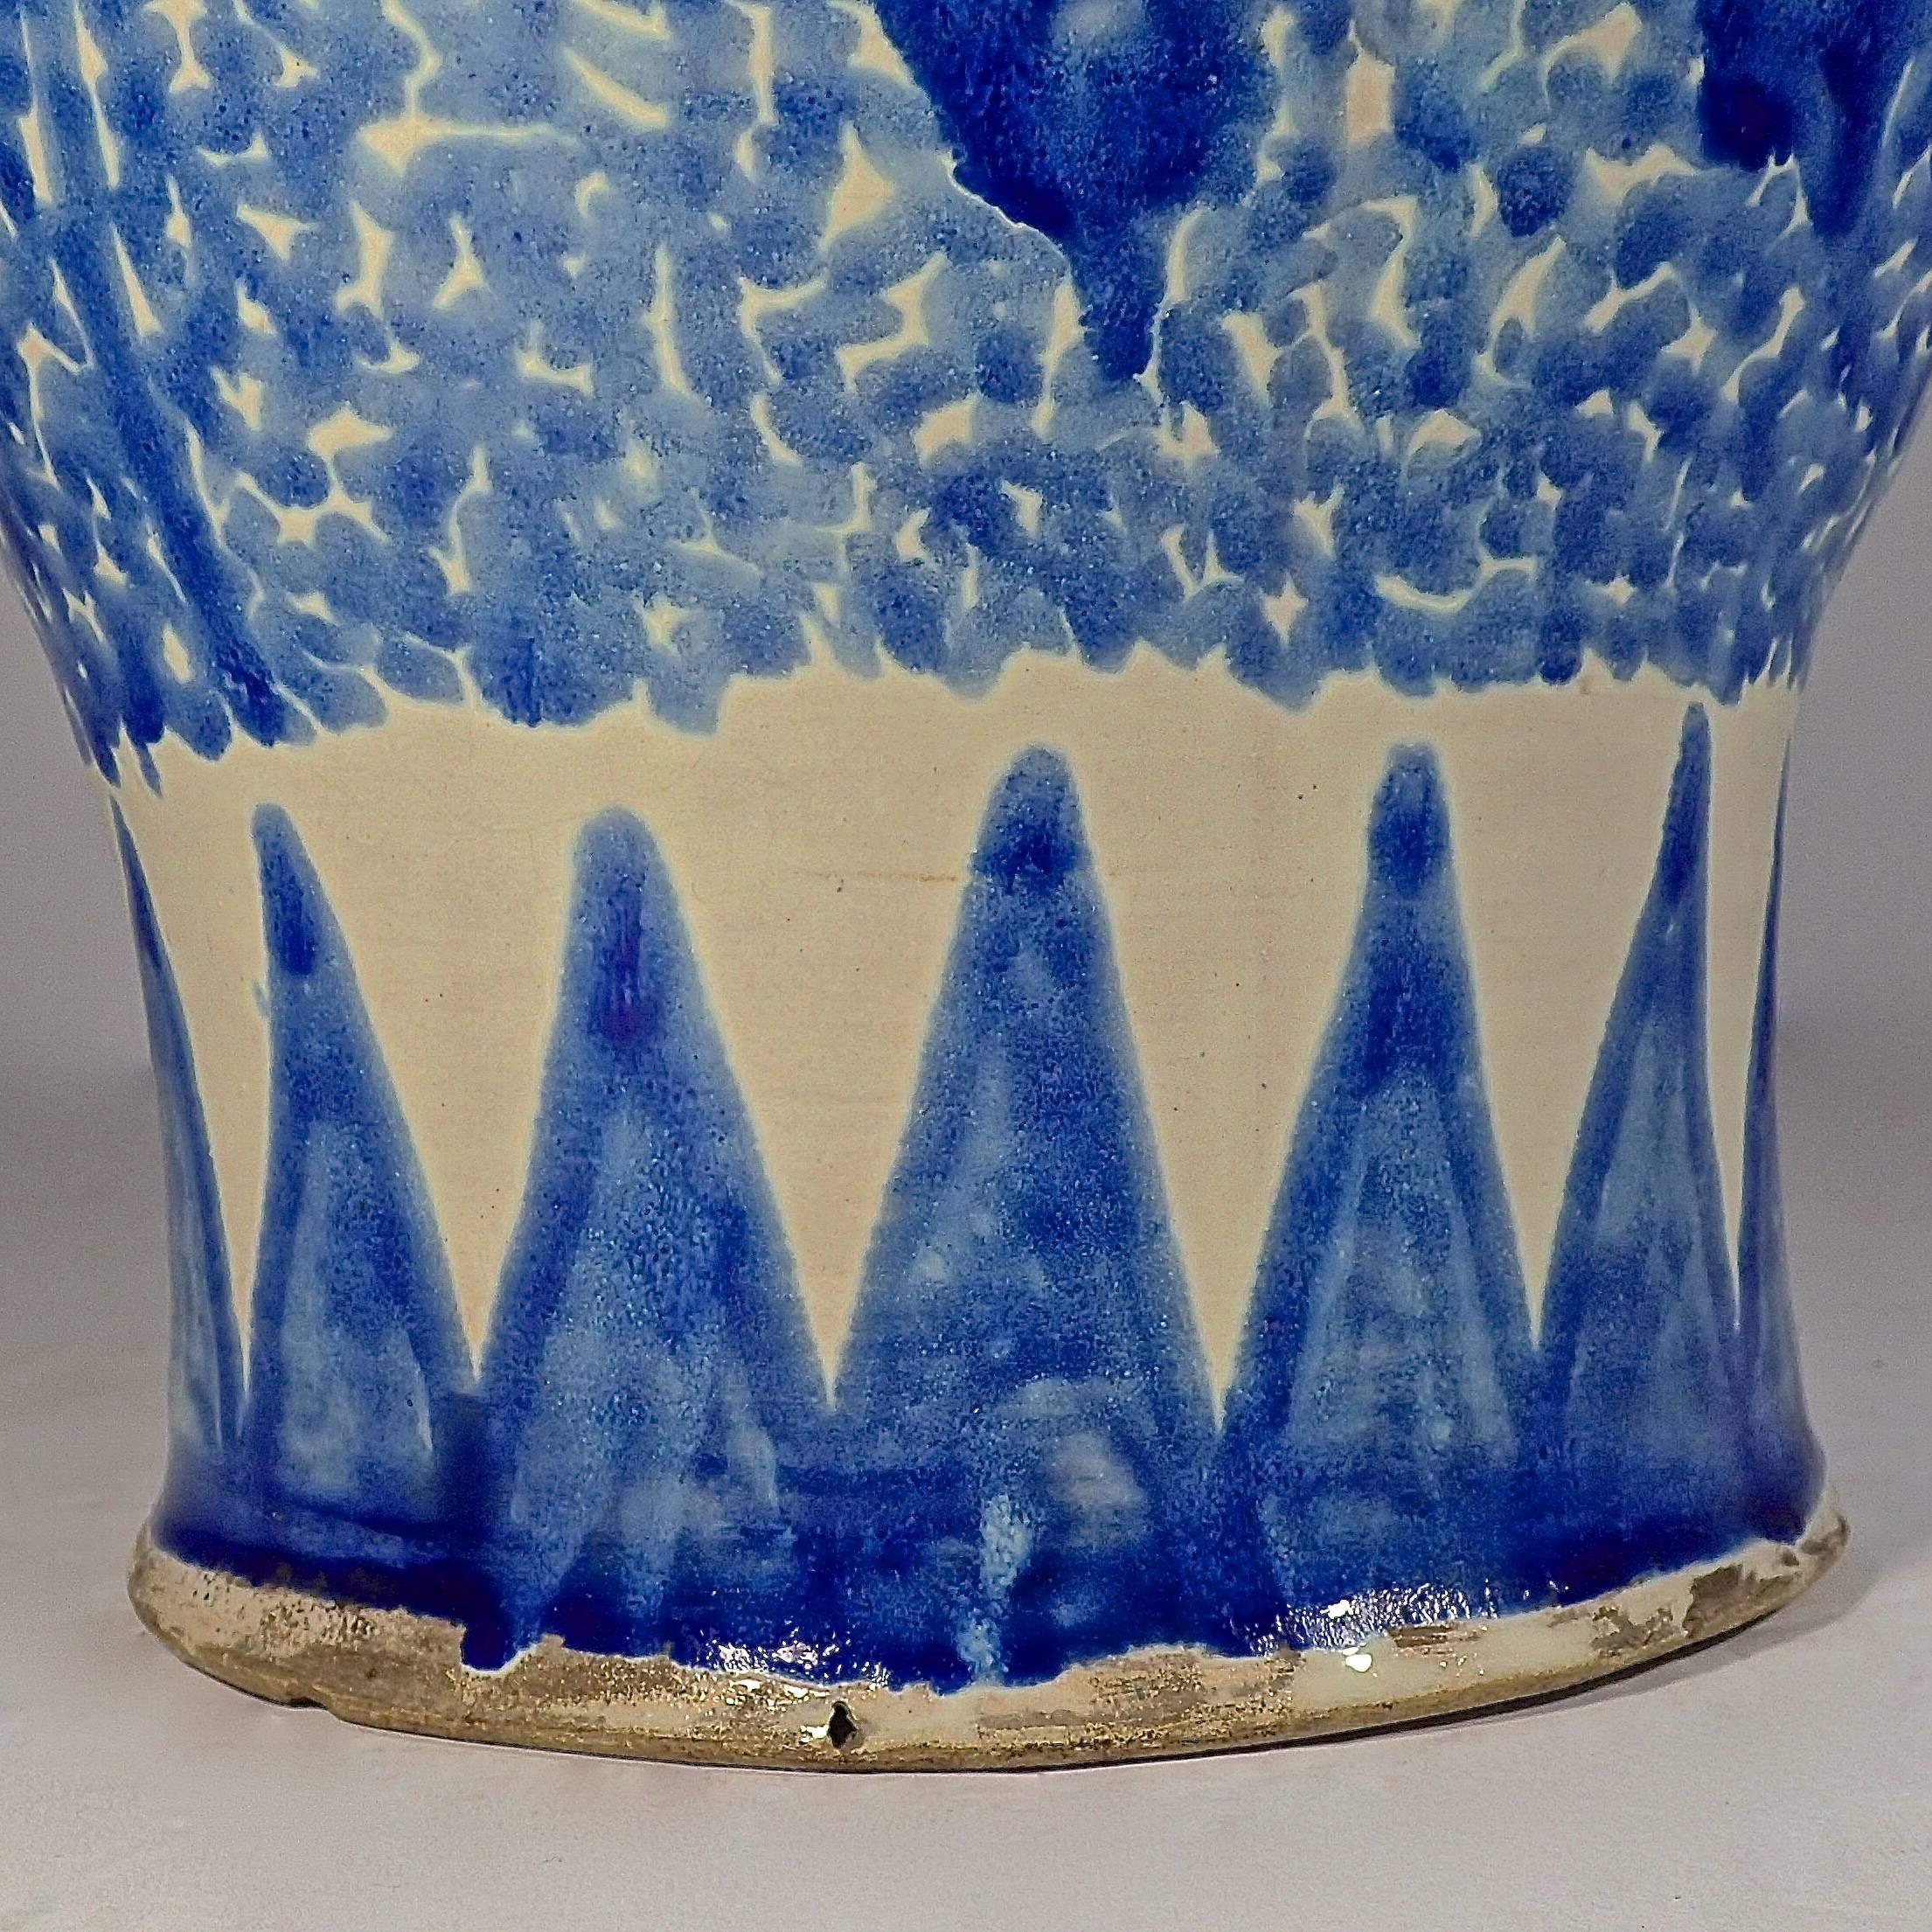 Decorative blue-washed glazed jar with painted floral motifs and repeating border. 
No signature